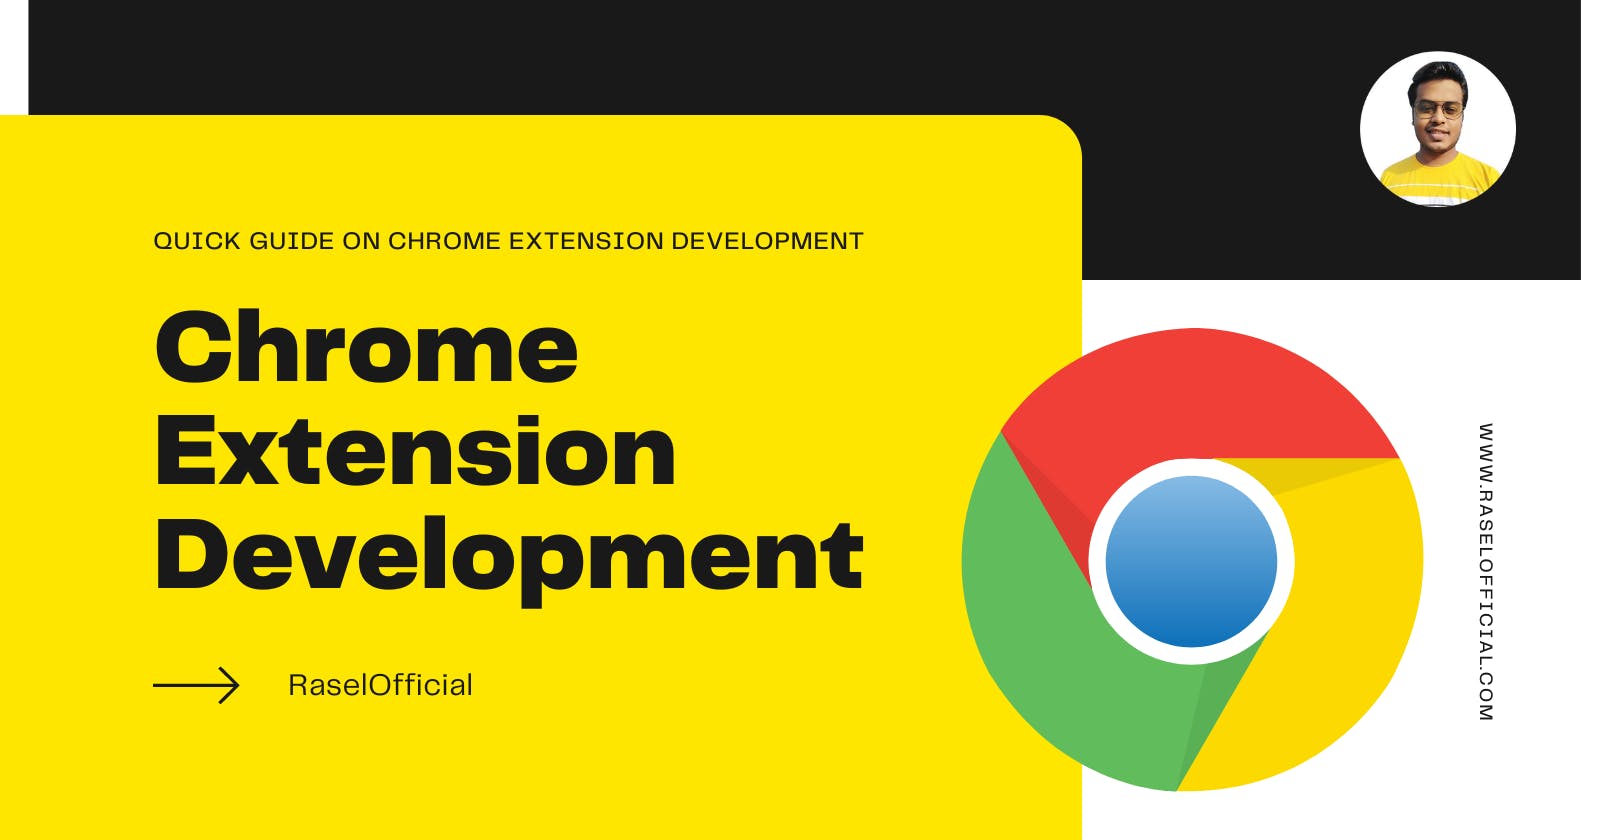 Chrome Extension Development Quick Guide By RaselOfficial